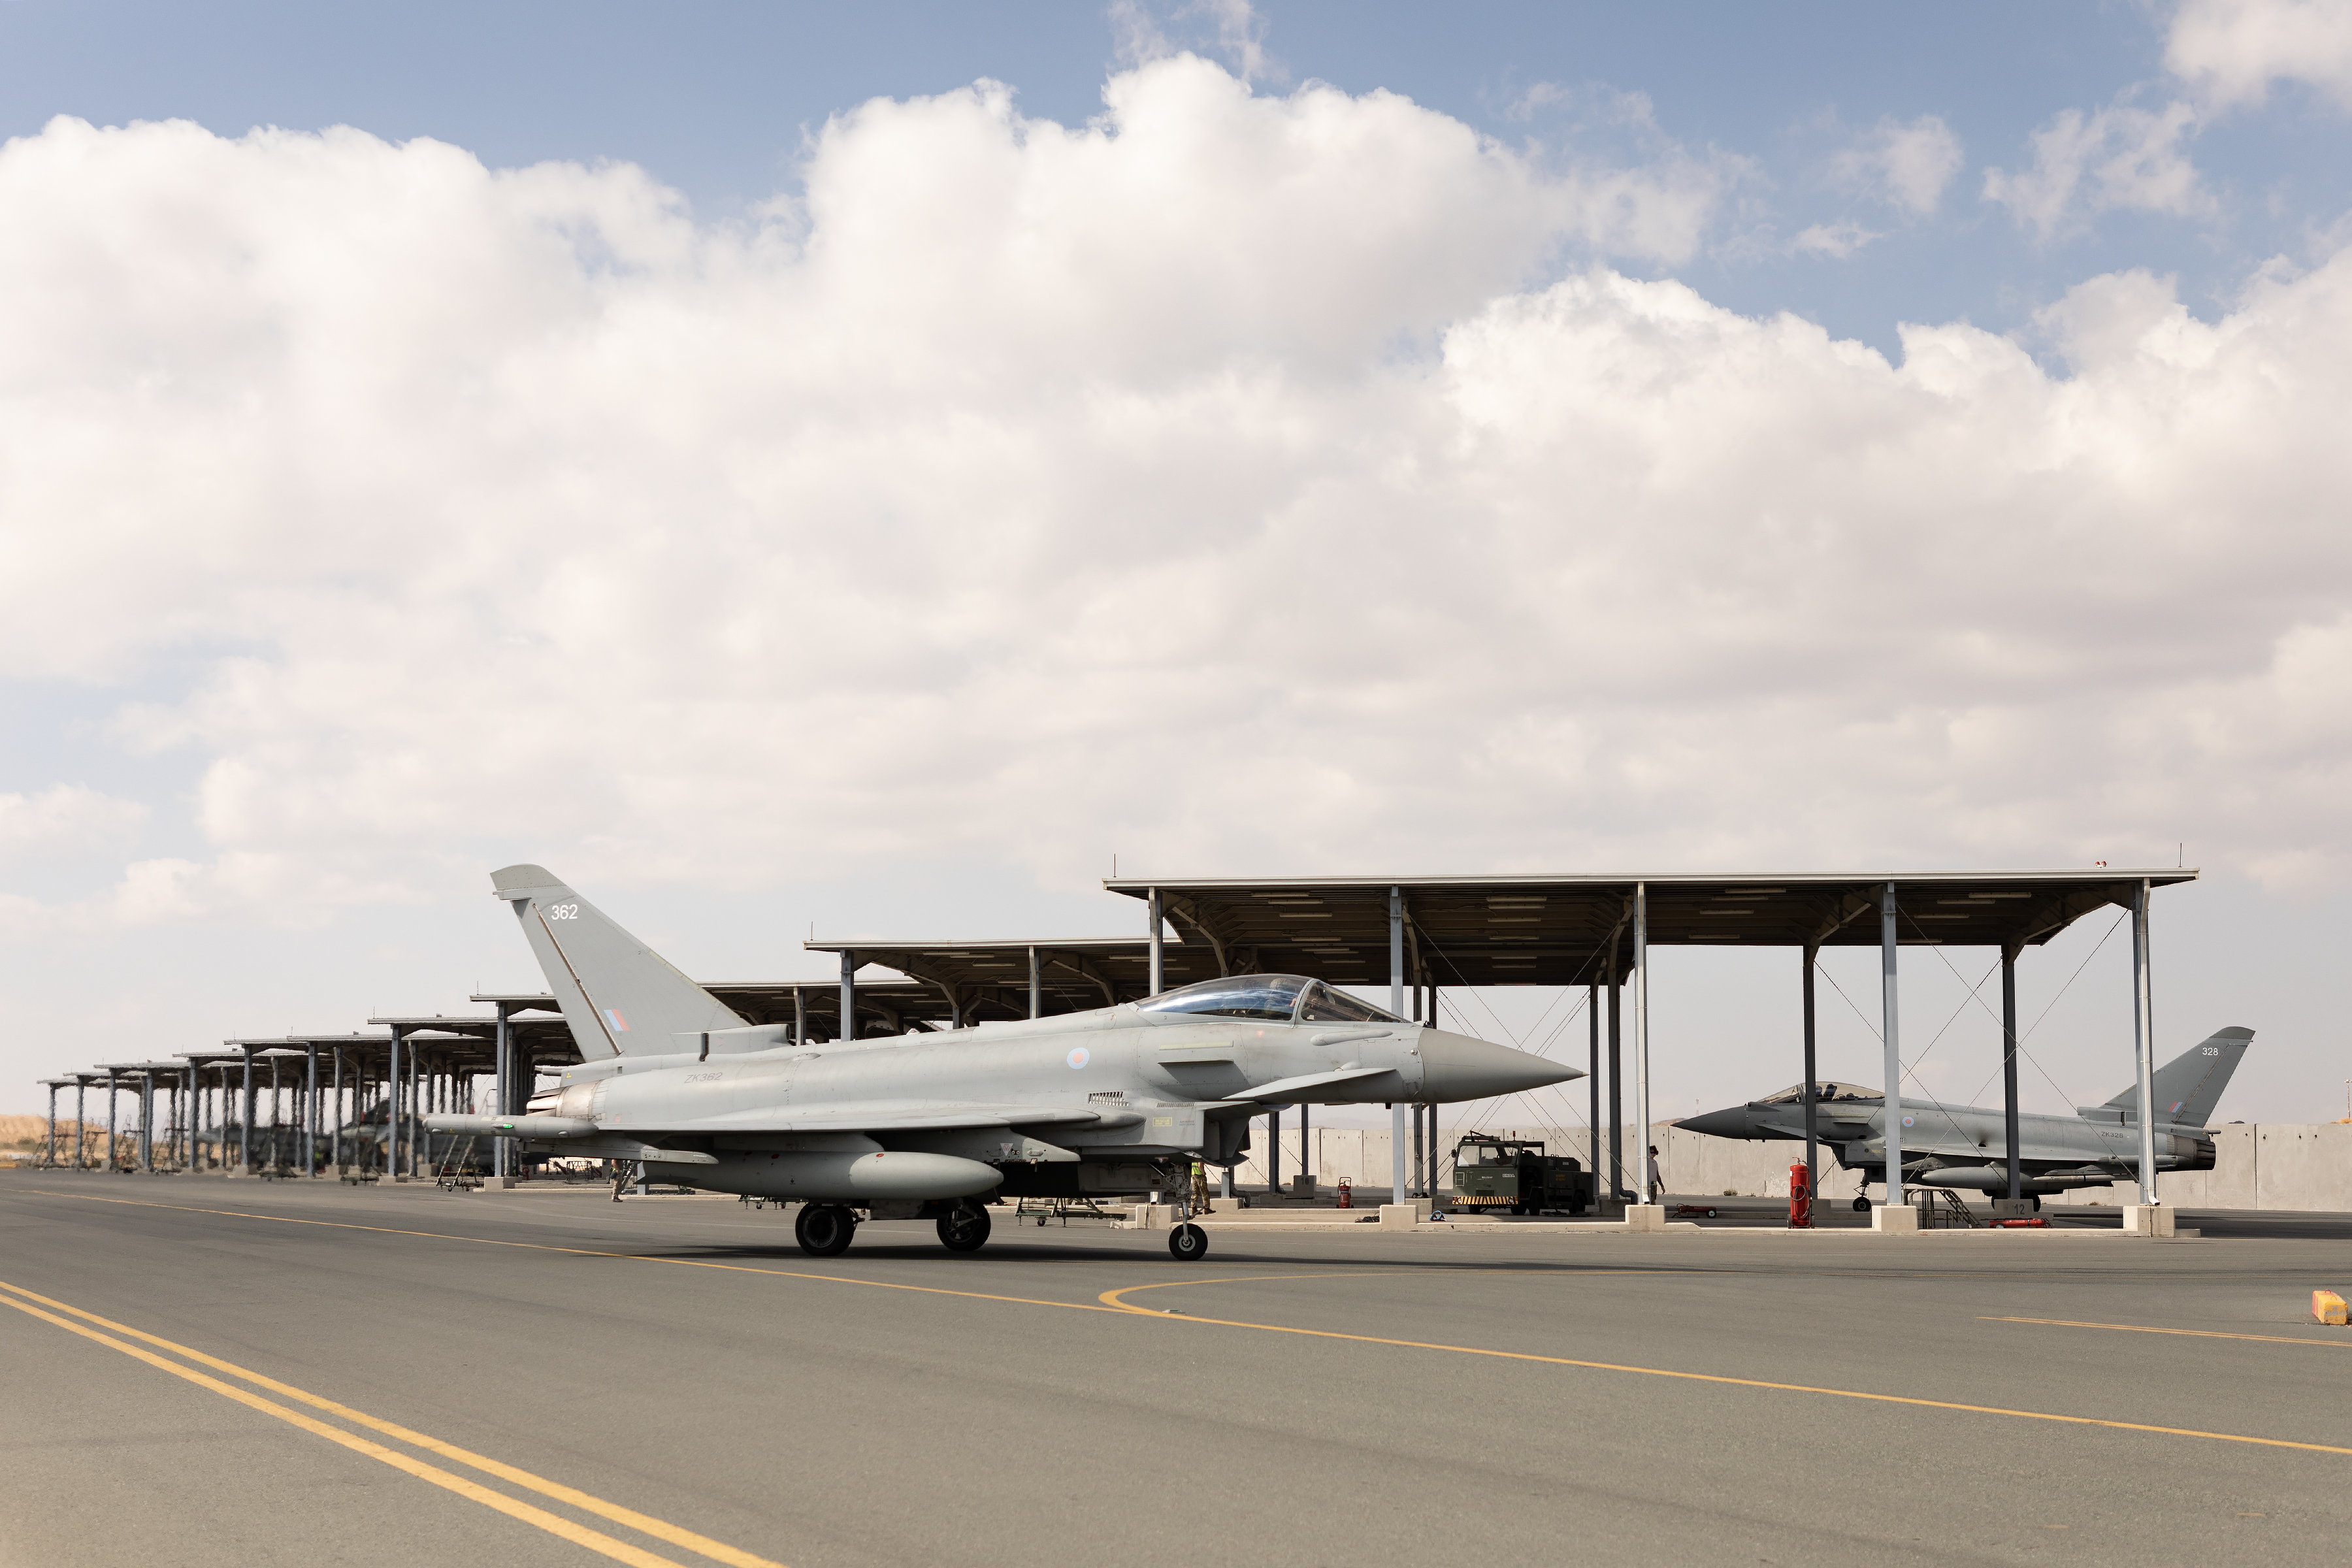 Image shows RAF Typhoons under temporary hangars on the airfield.